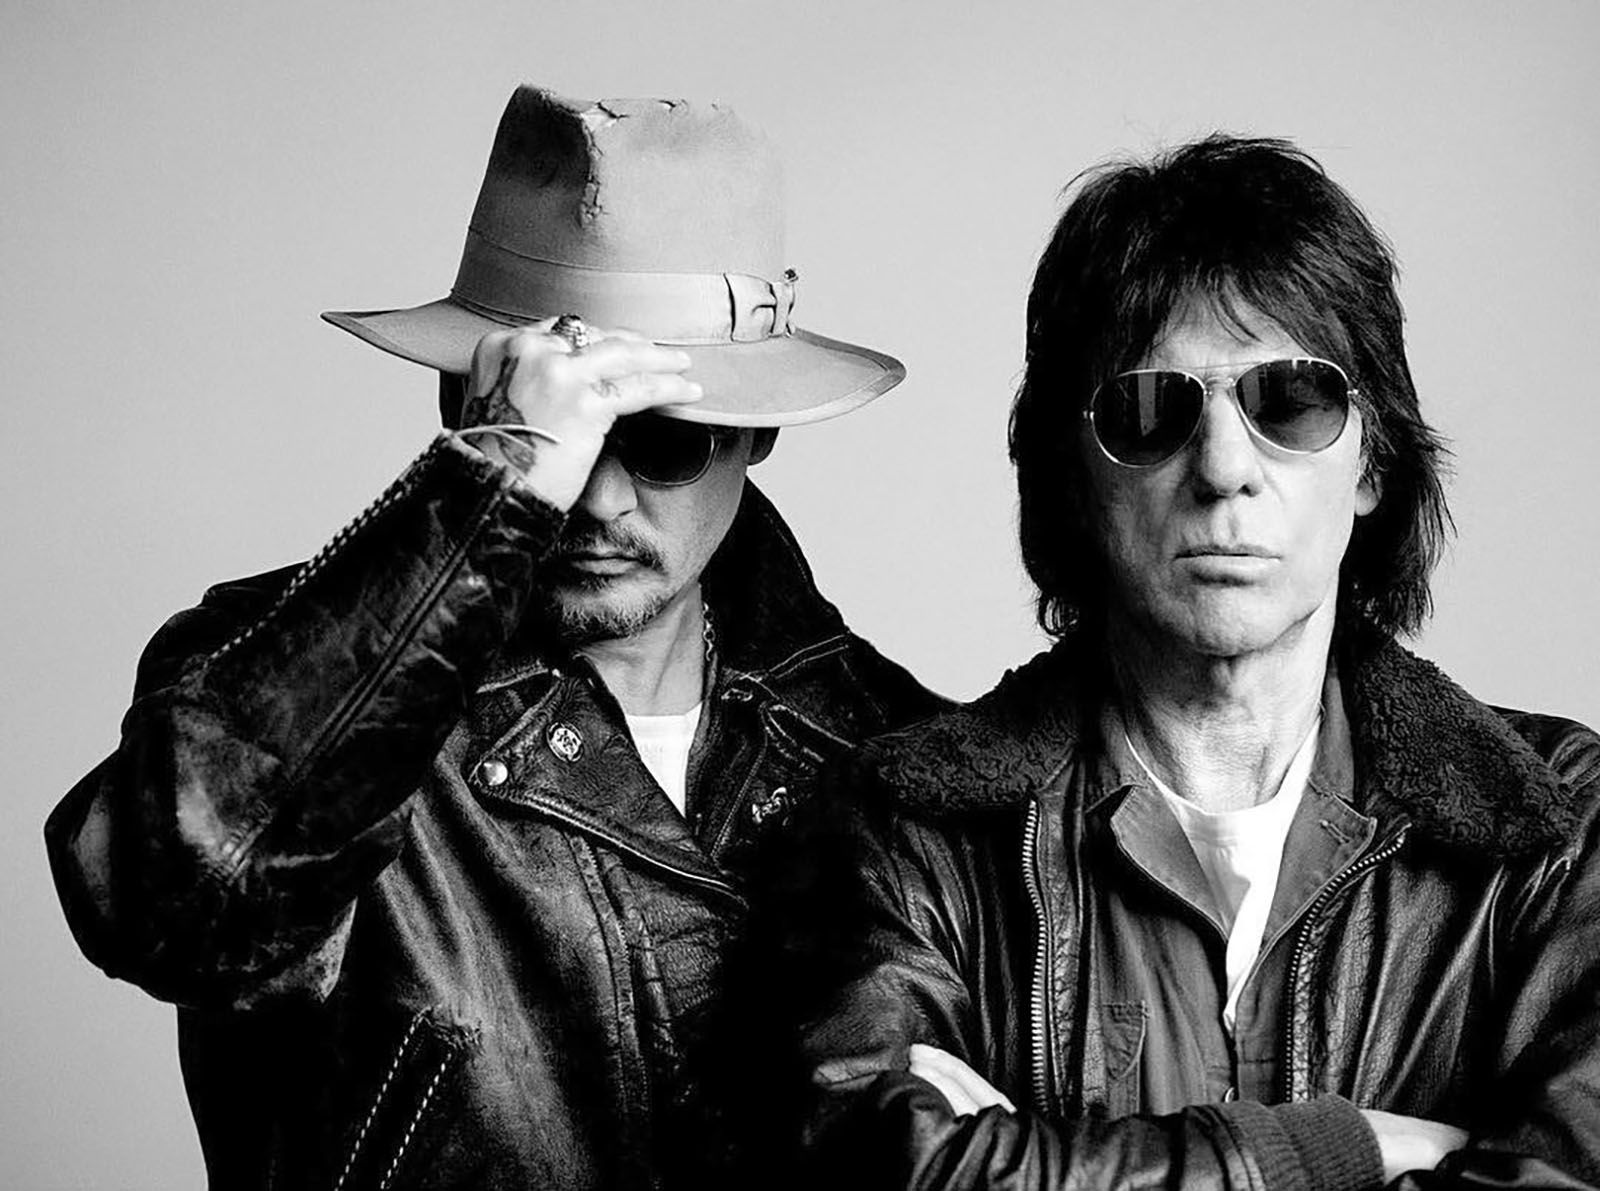 Jeff Beck and Johnny Depp are embarking on a tour.